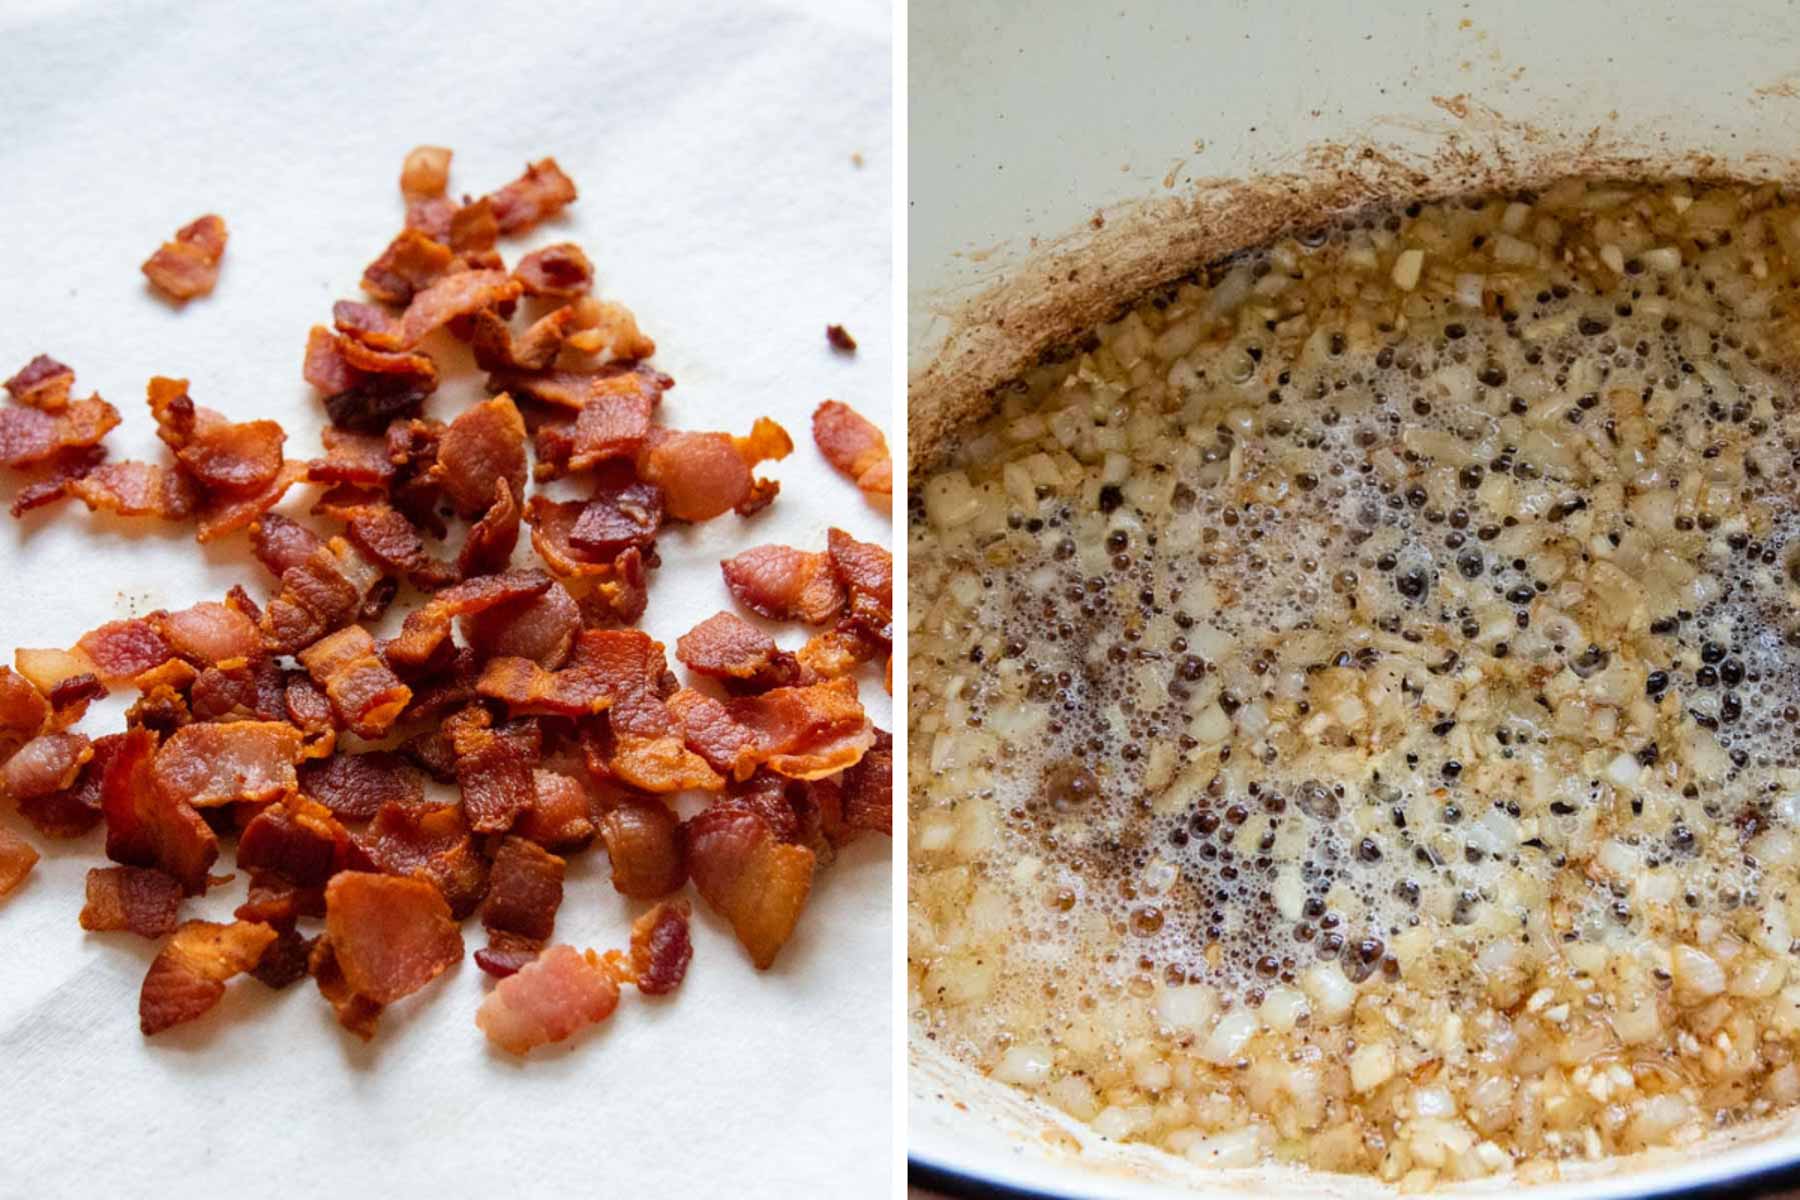 images showing how to fry bacon and cook onions.